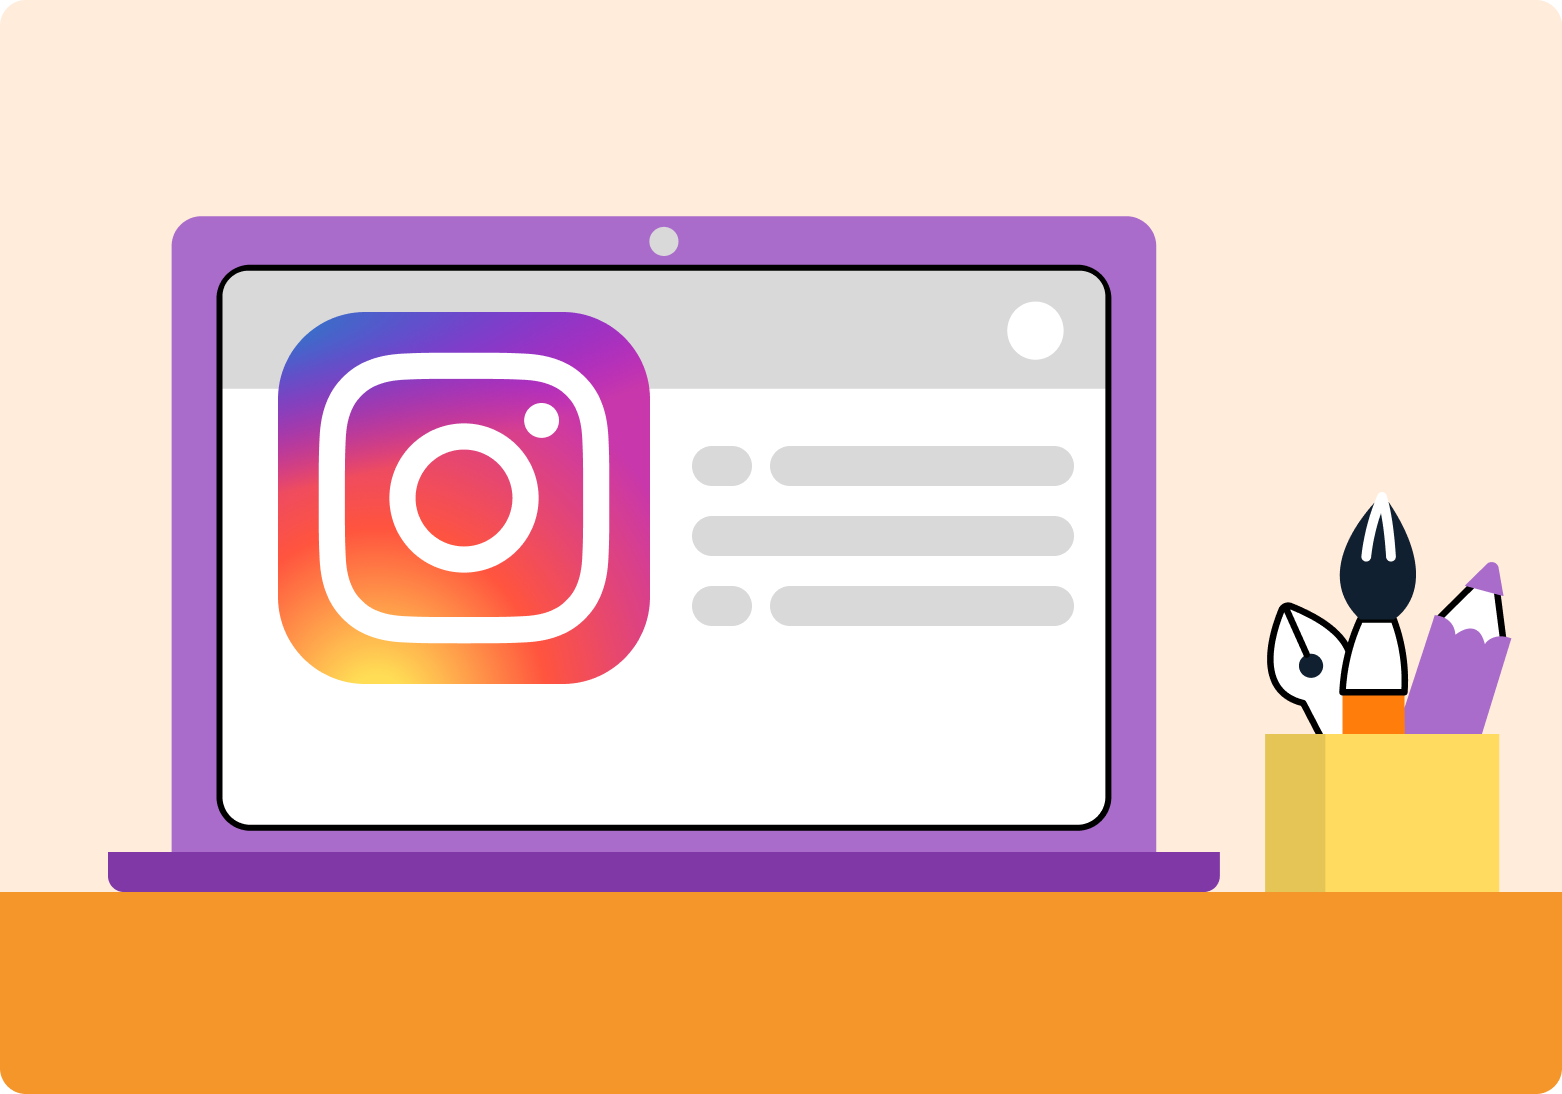 How to Get Verified on Instagram: 7 Easy Steps - Tailwind Blog